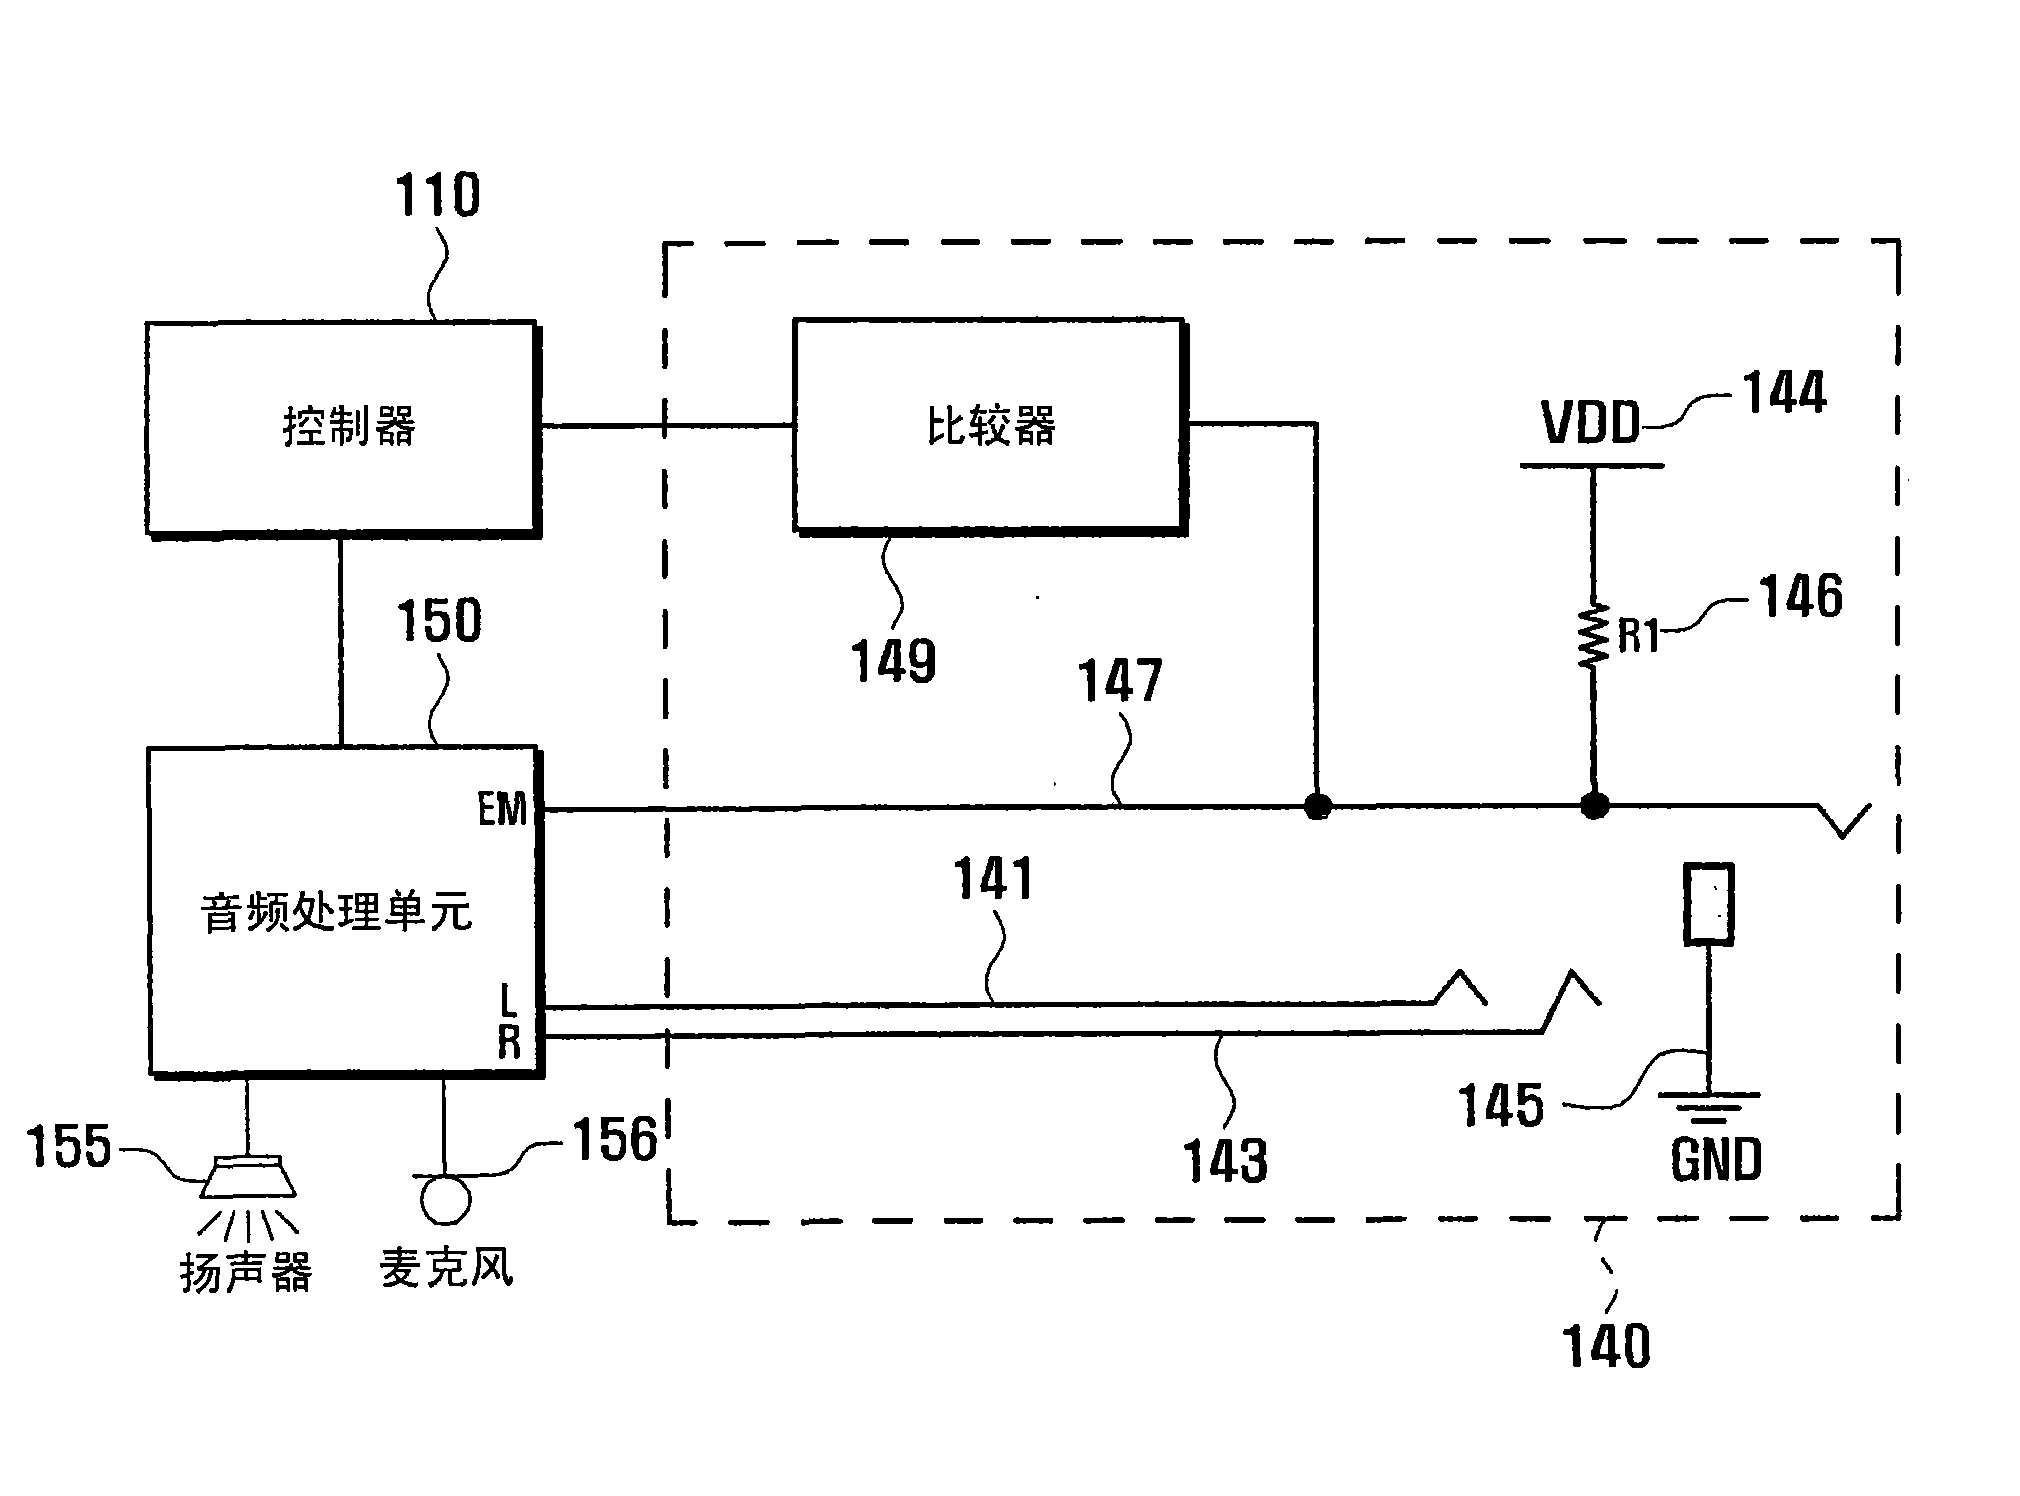 Portable device including earphone circuit and operation method using the same